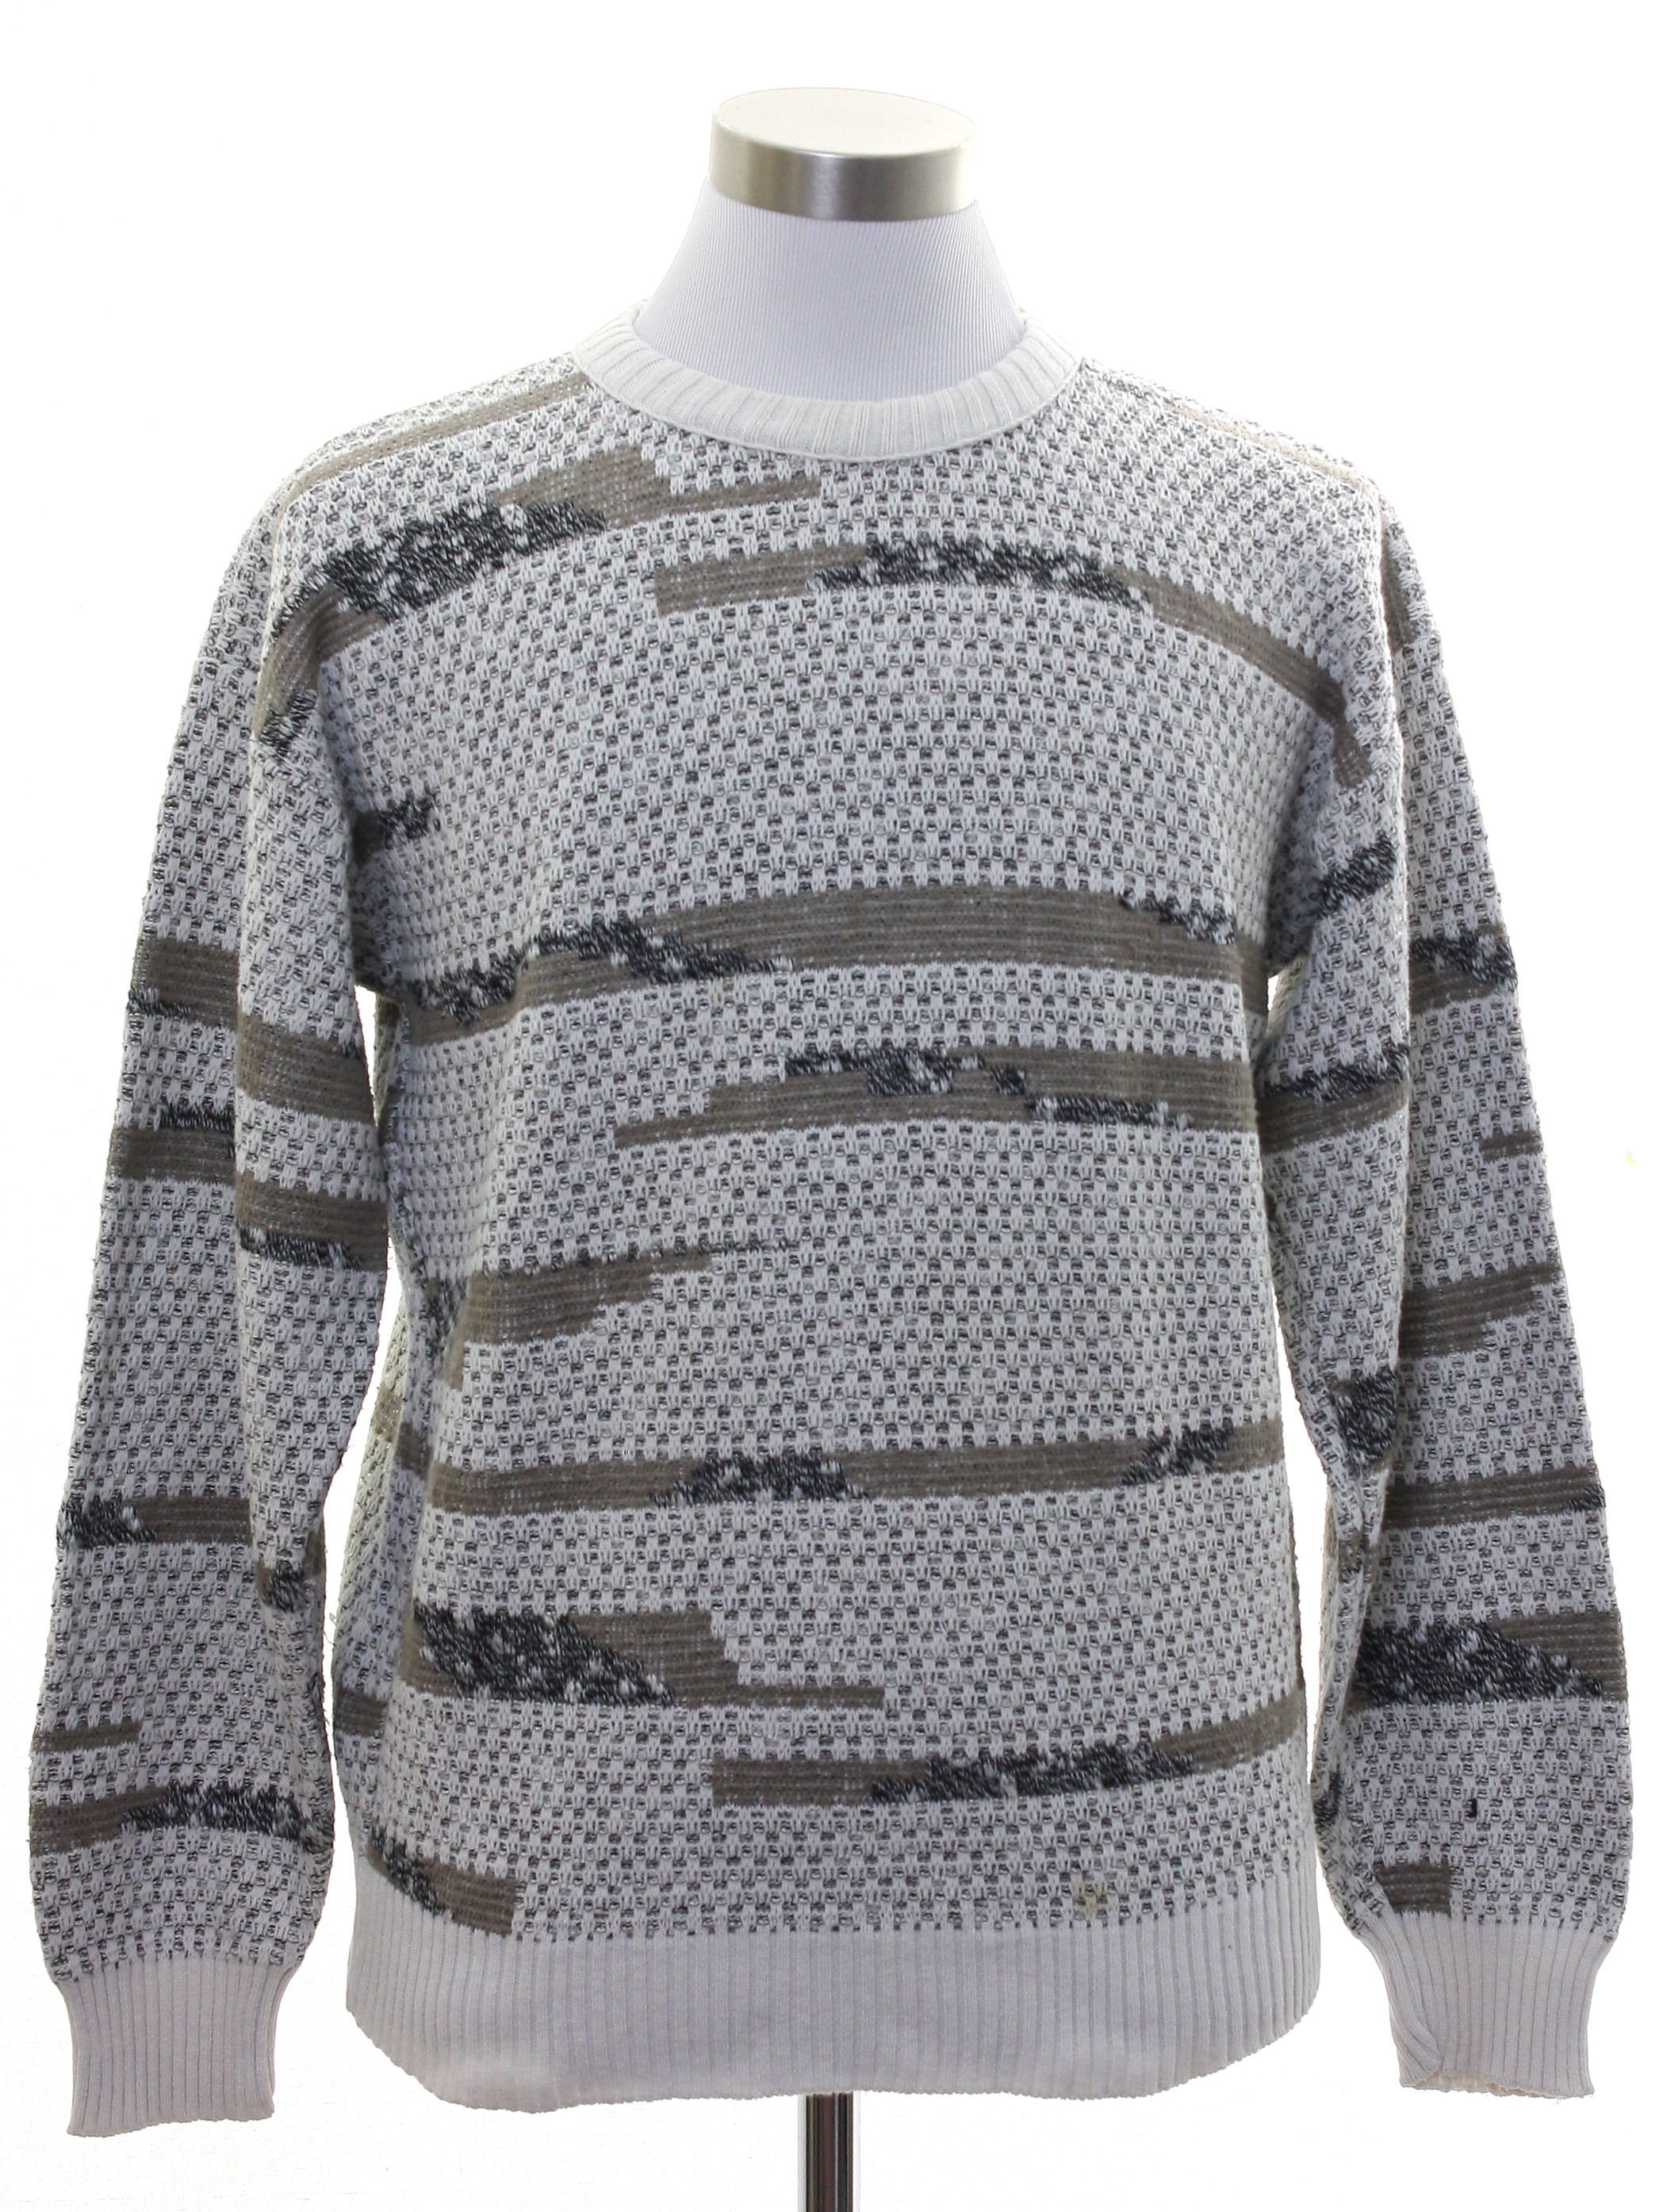 1980s Protege Sweater: 80s -Protege- Mens white background wool acrylic ...